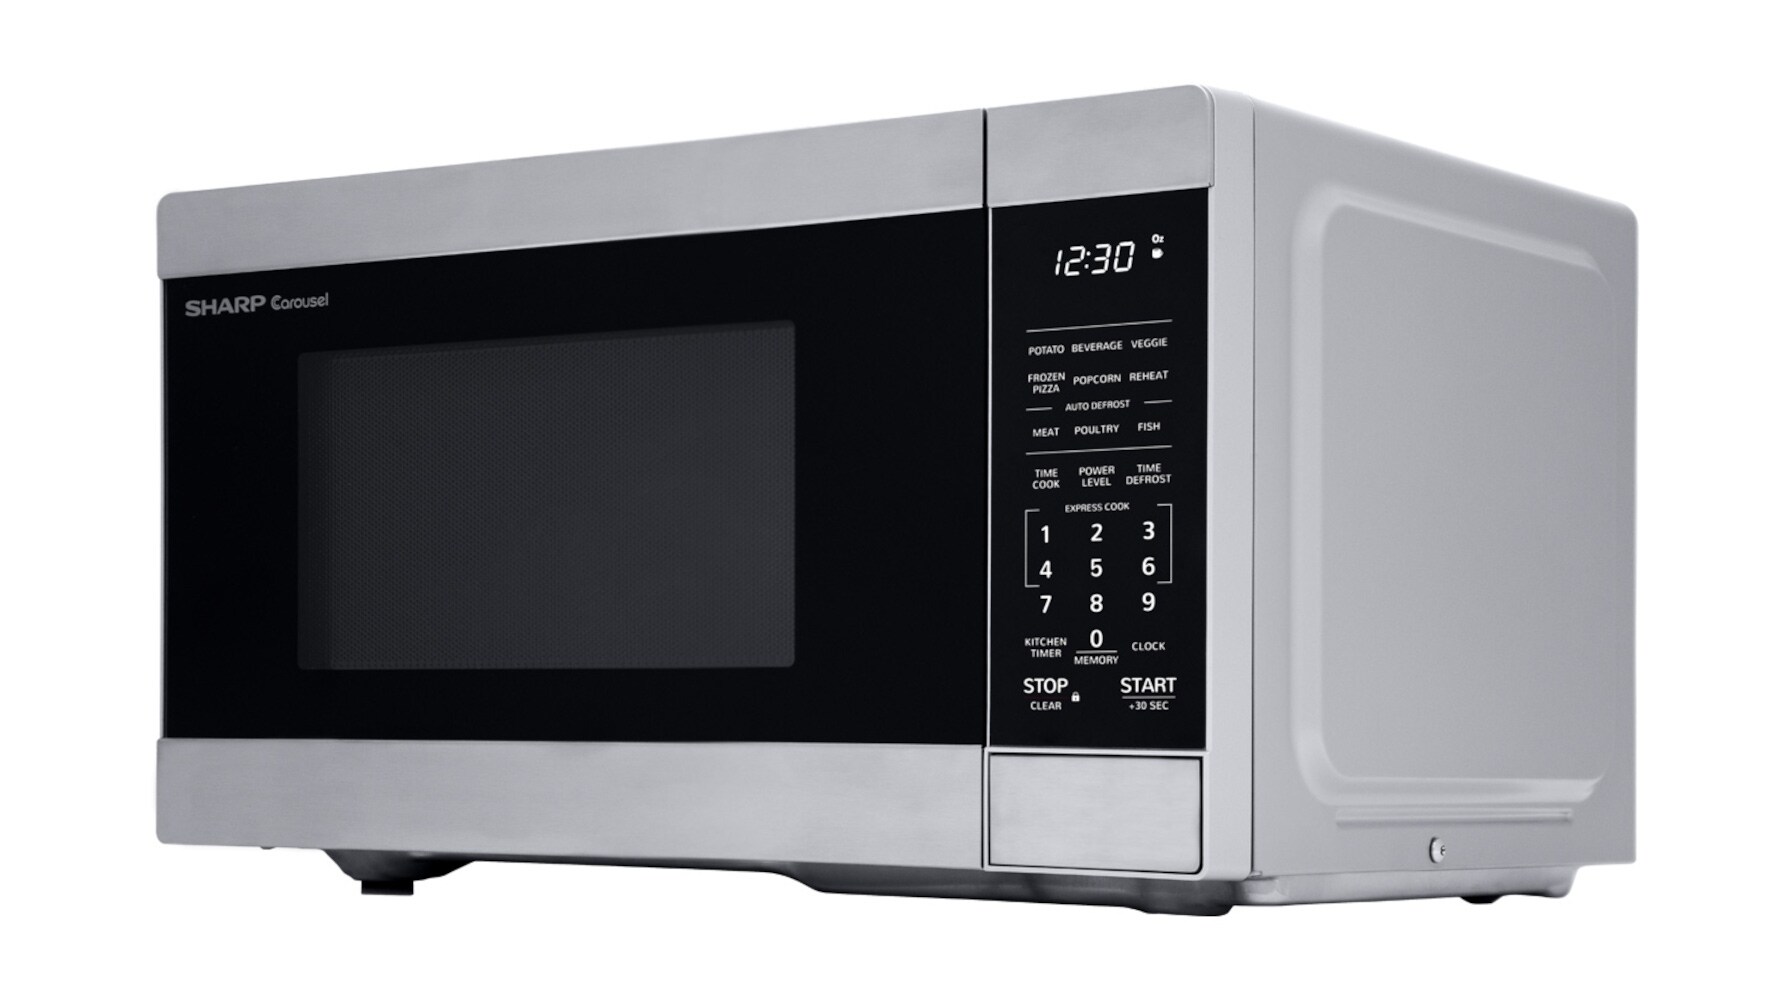 Toshiba 2.0 Cu. ft. Family-Size 1200-Watt Stainless Steel Microwave Oven  with Sensor 